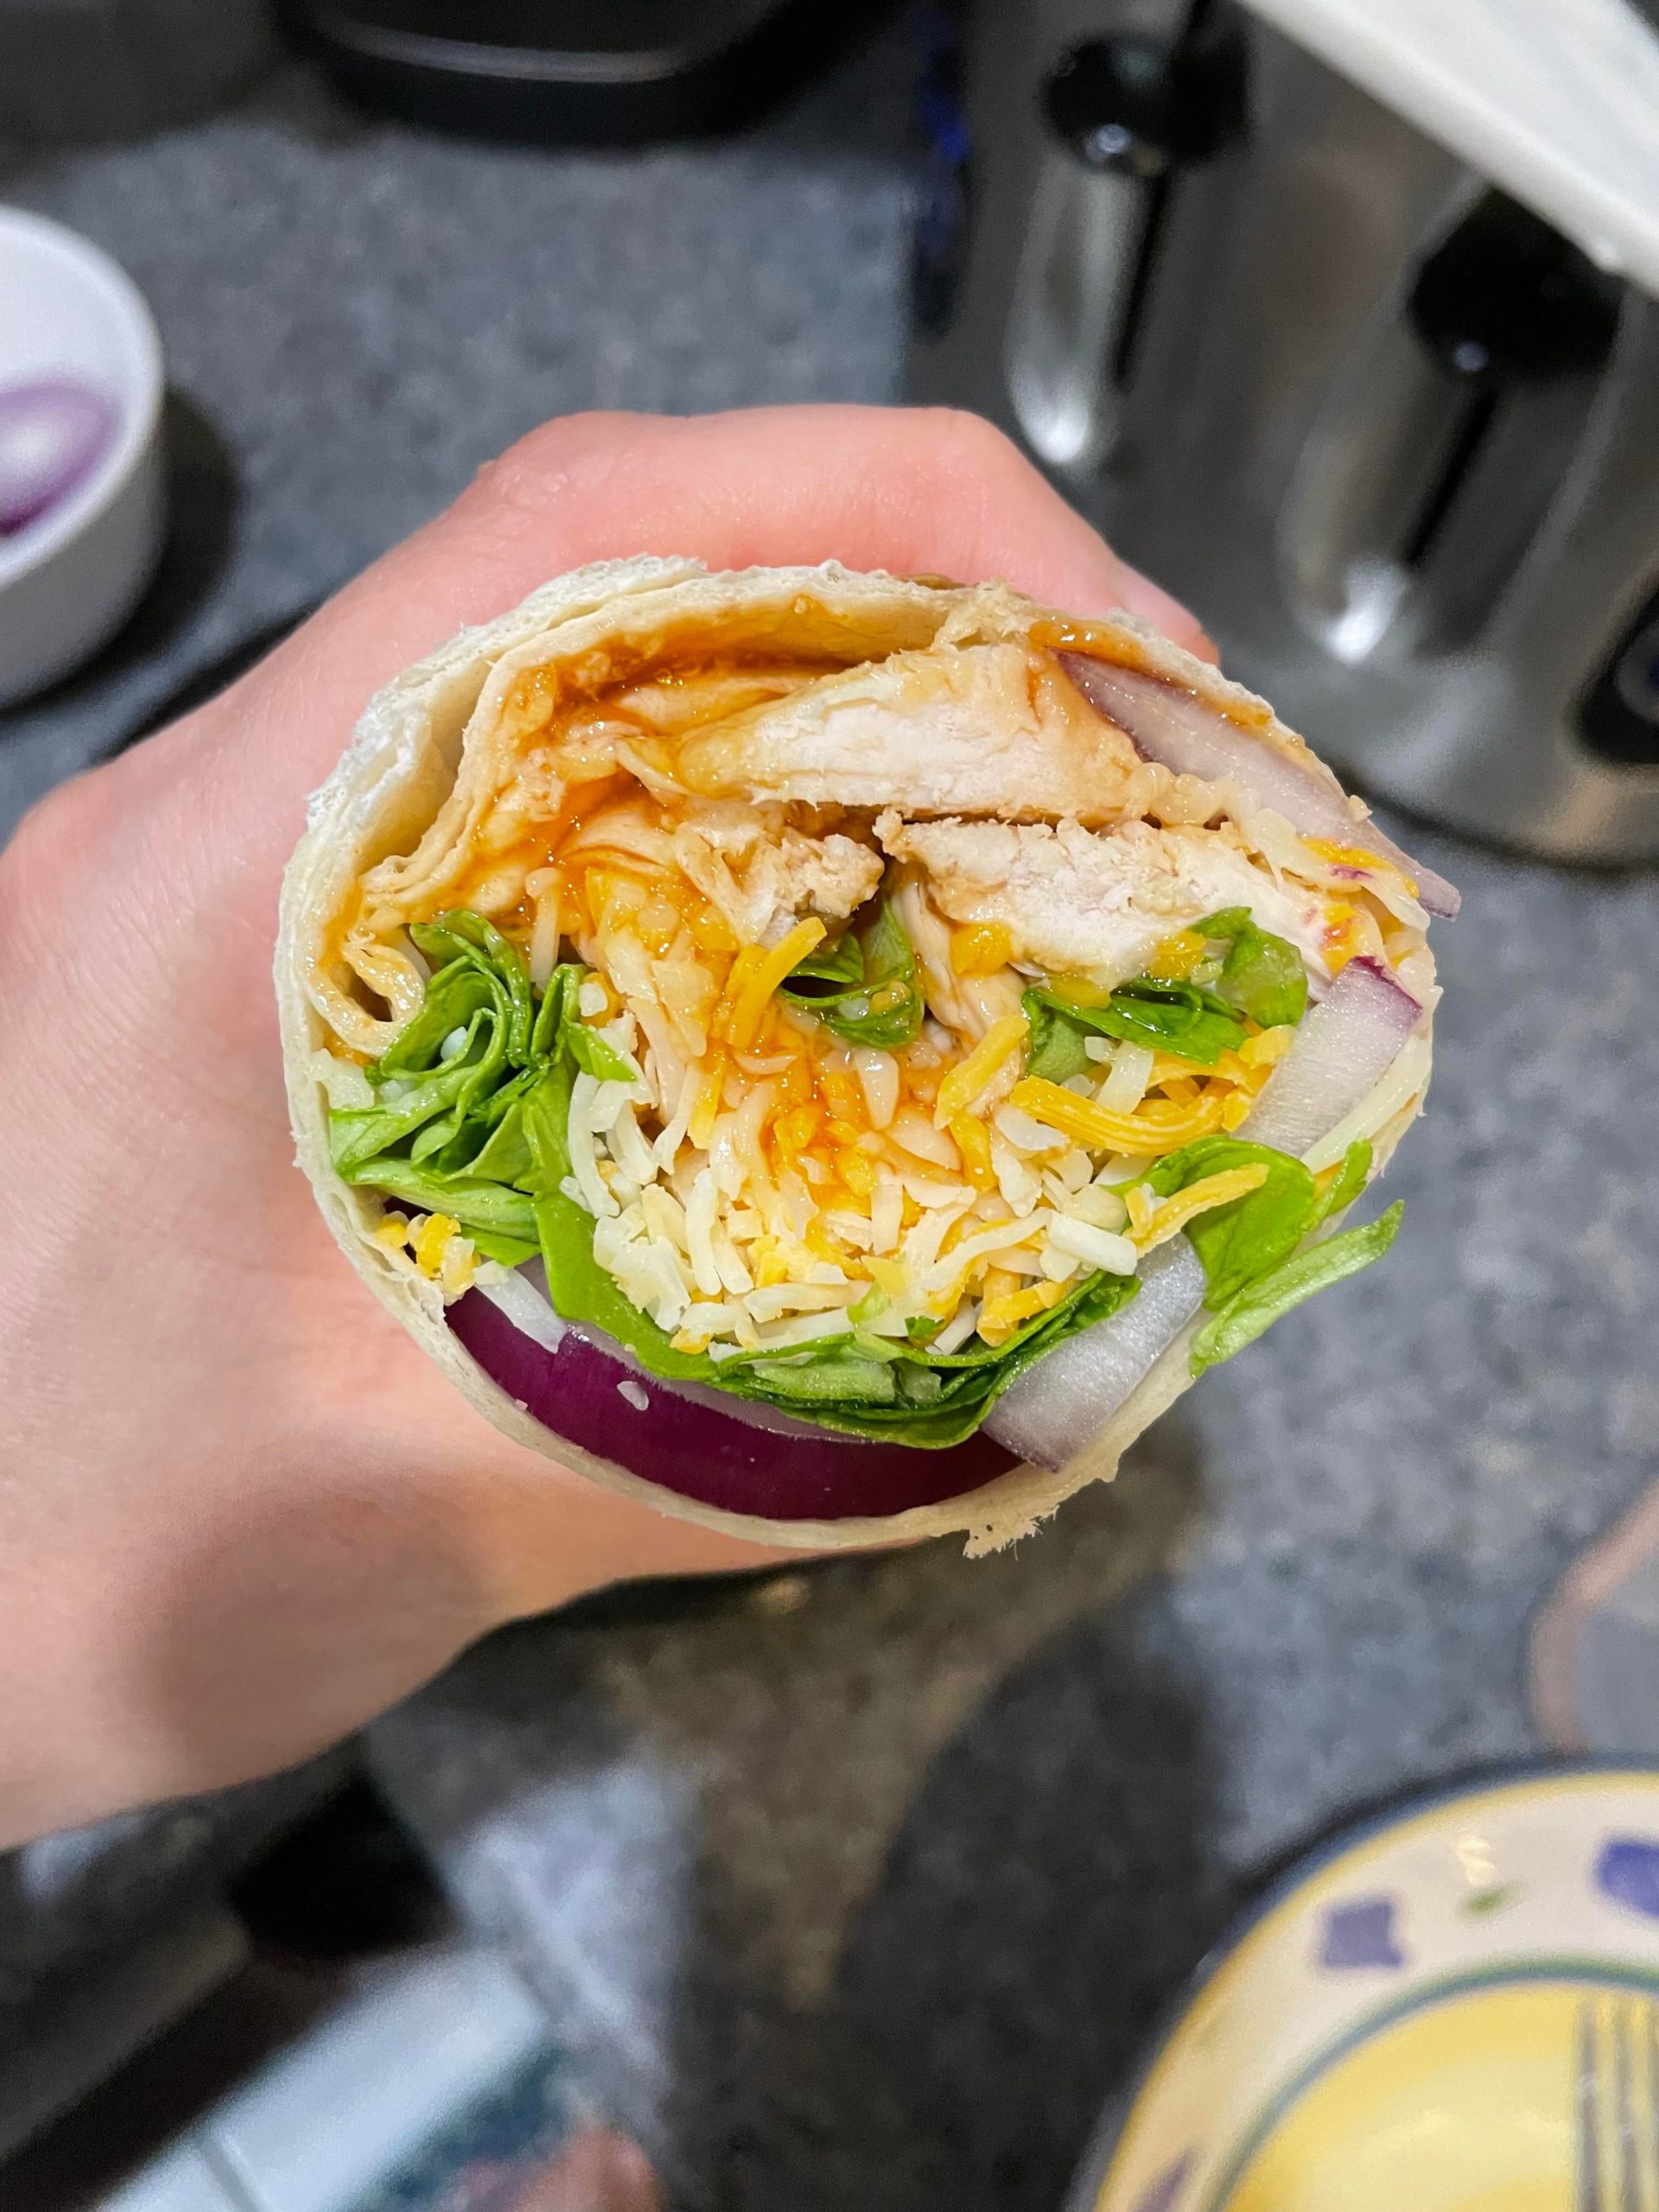 Sweet chili chicken wrap - Dining and Cooking